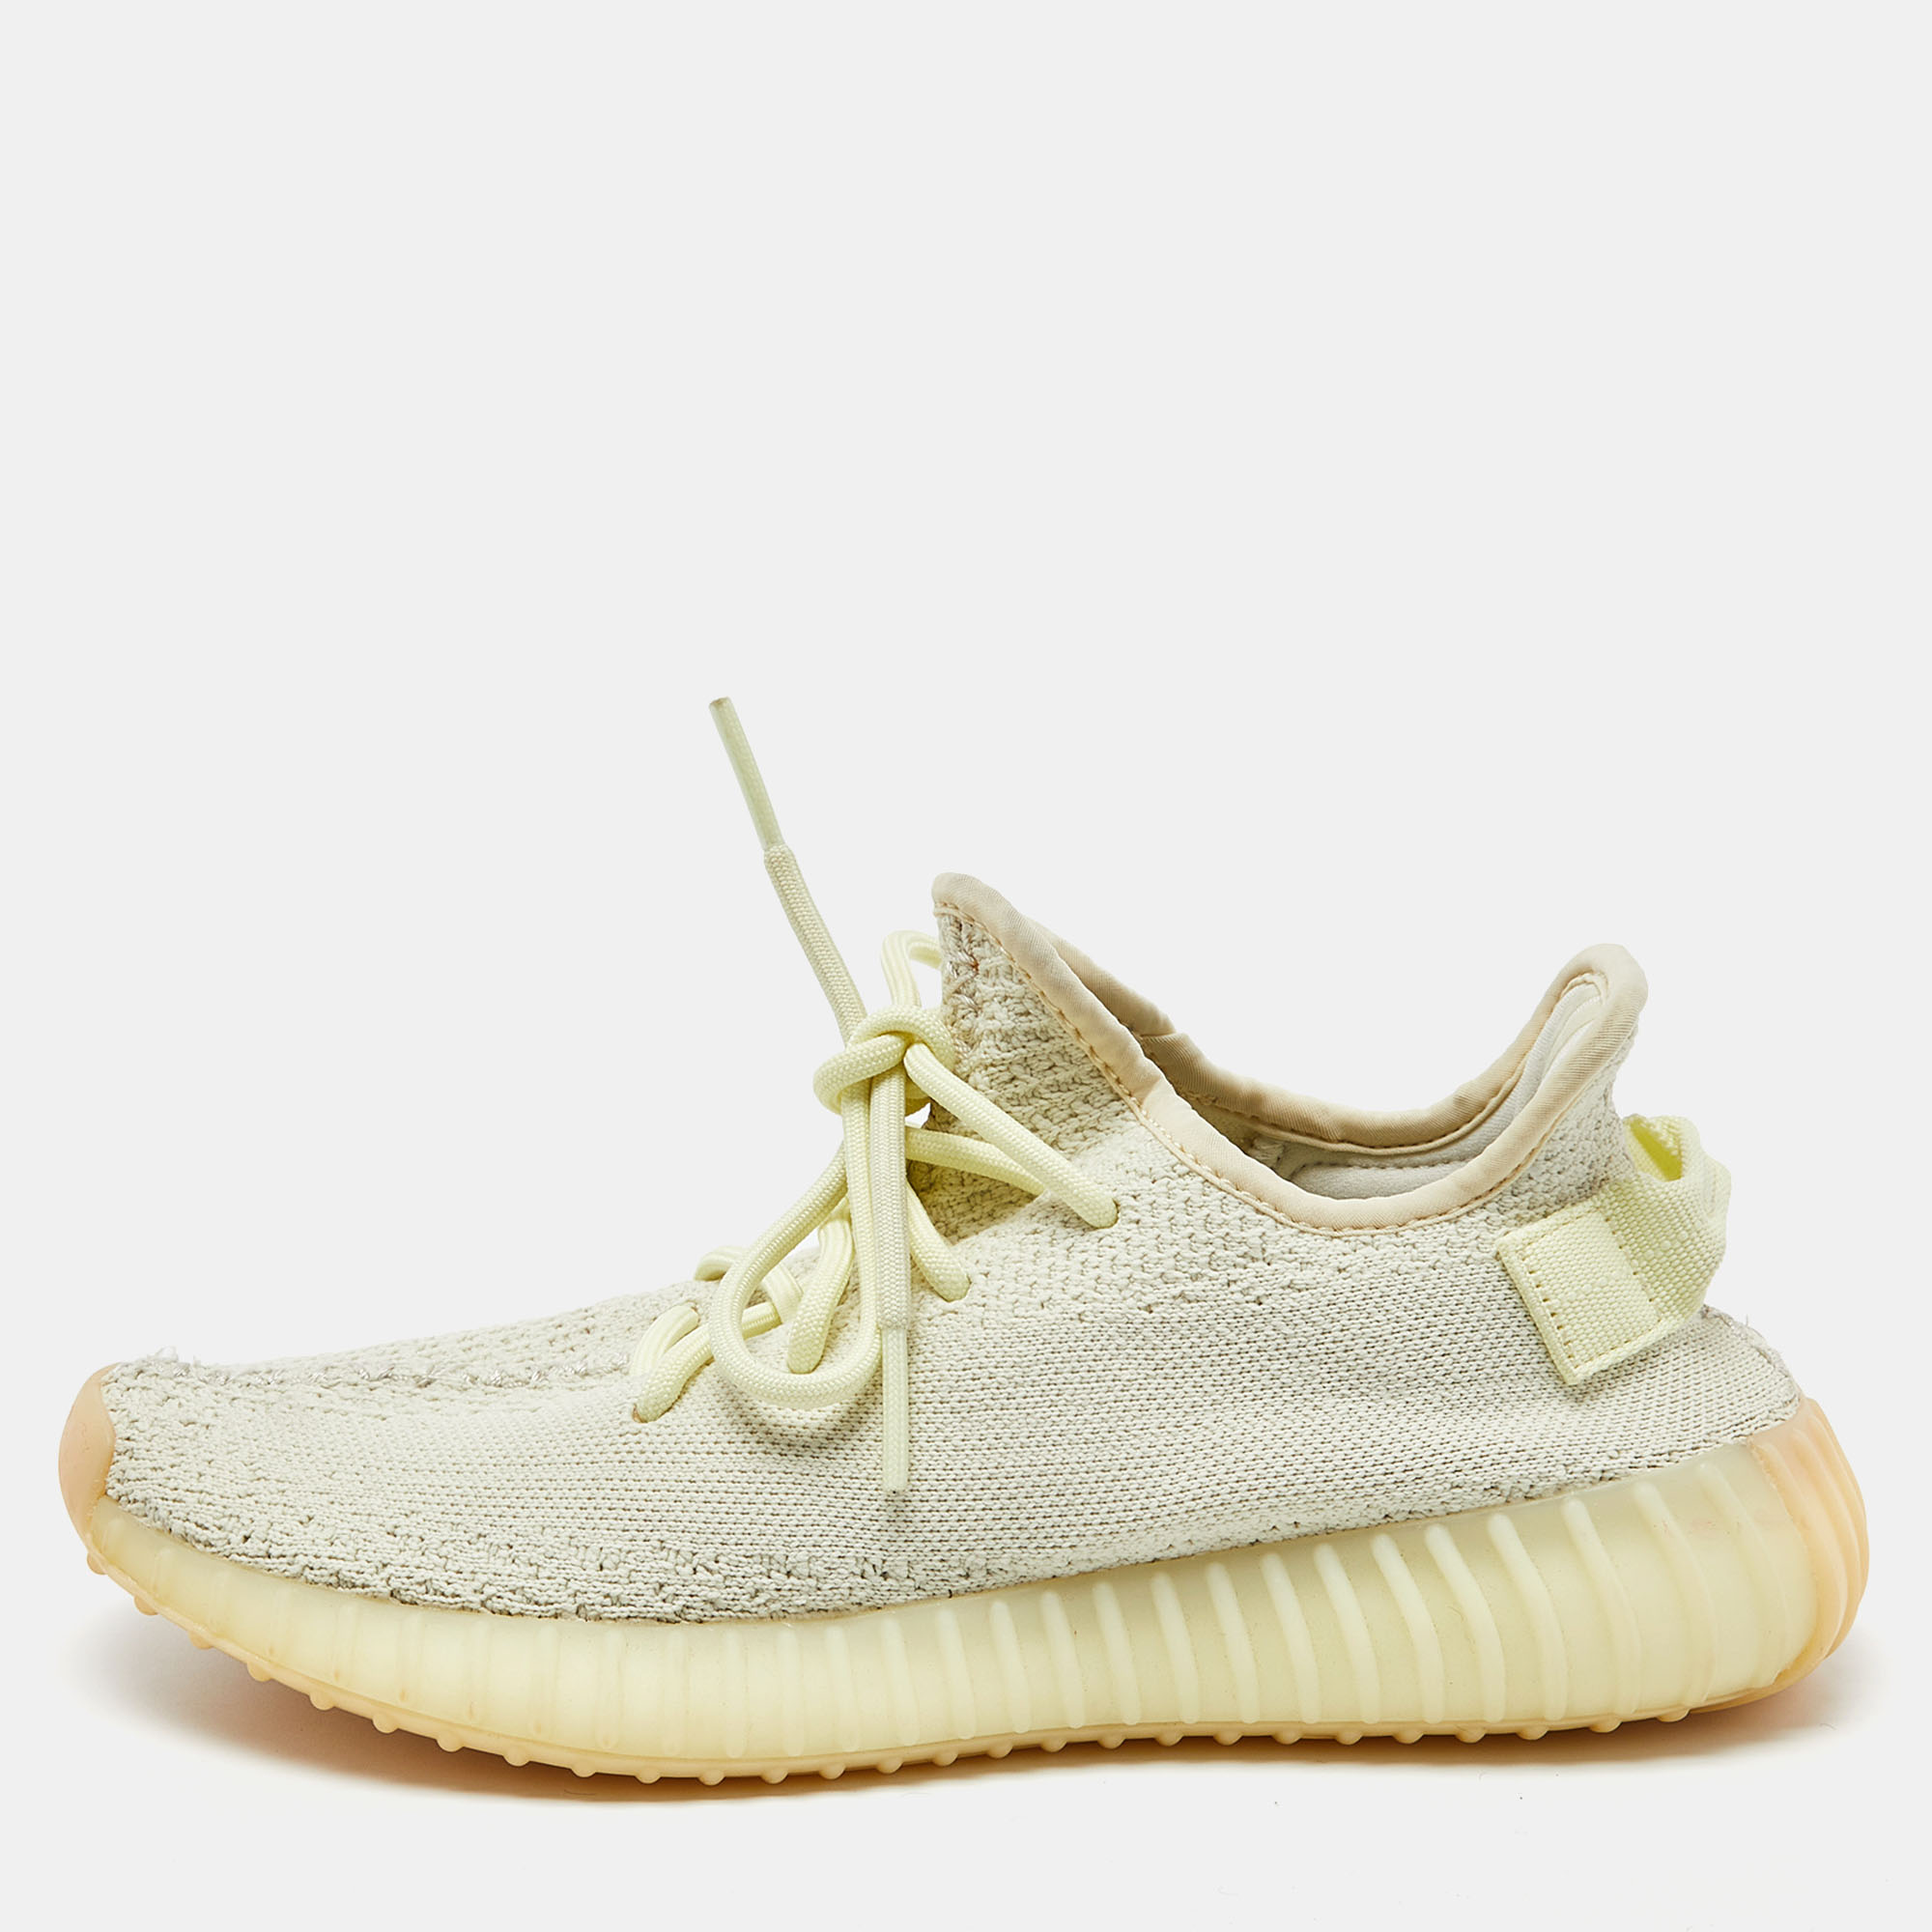 

Yeezy x Adidas Green Knit Fabric Boost 350 V2 Butter Sneakers Size  1/3